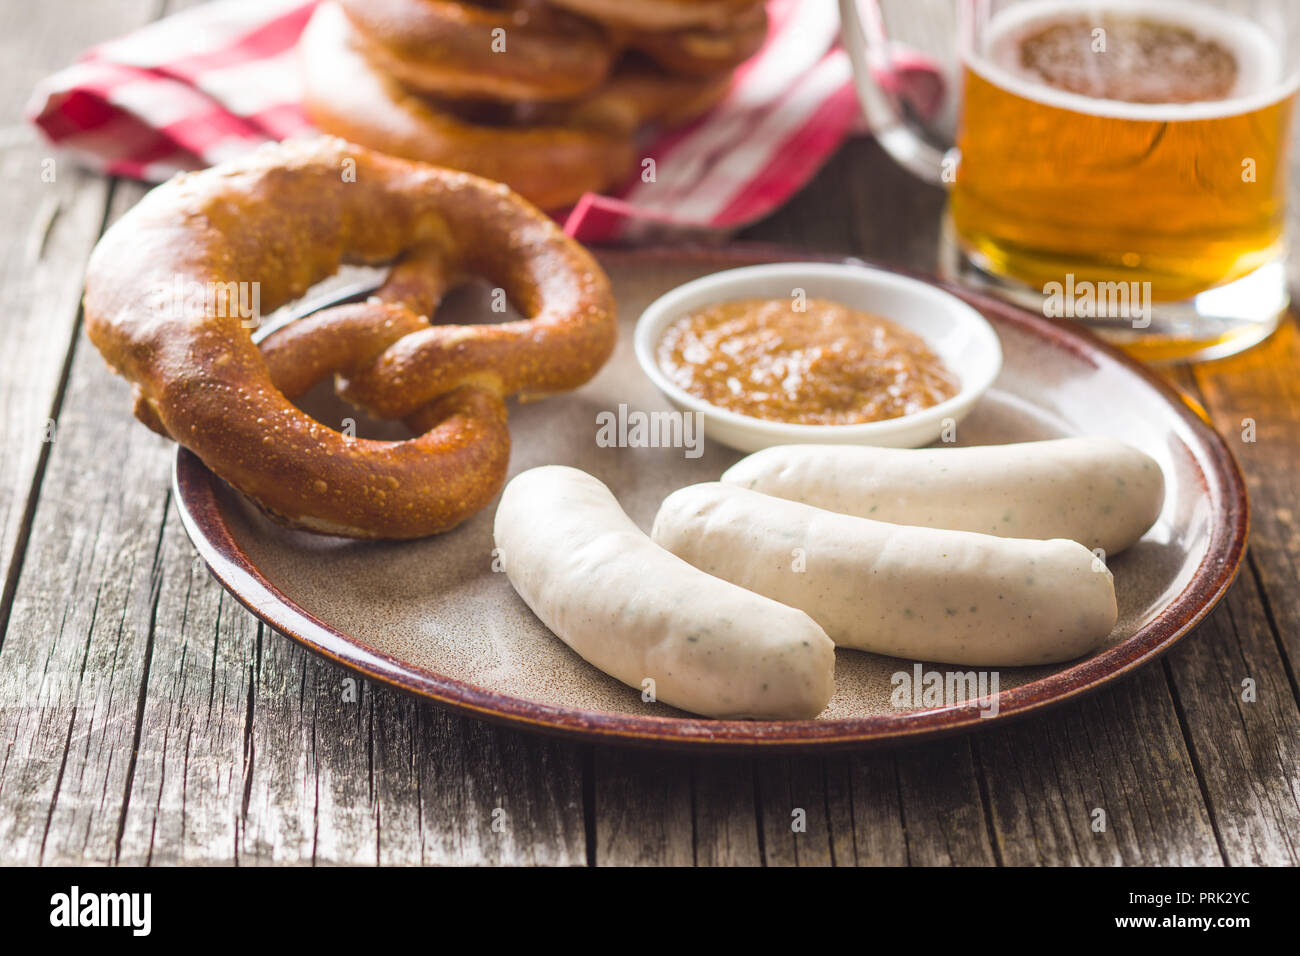 The bavarian weisswurst, pretzel and mustard on plate. Stock Photo